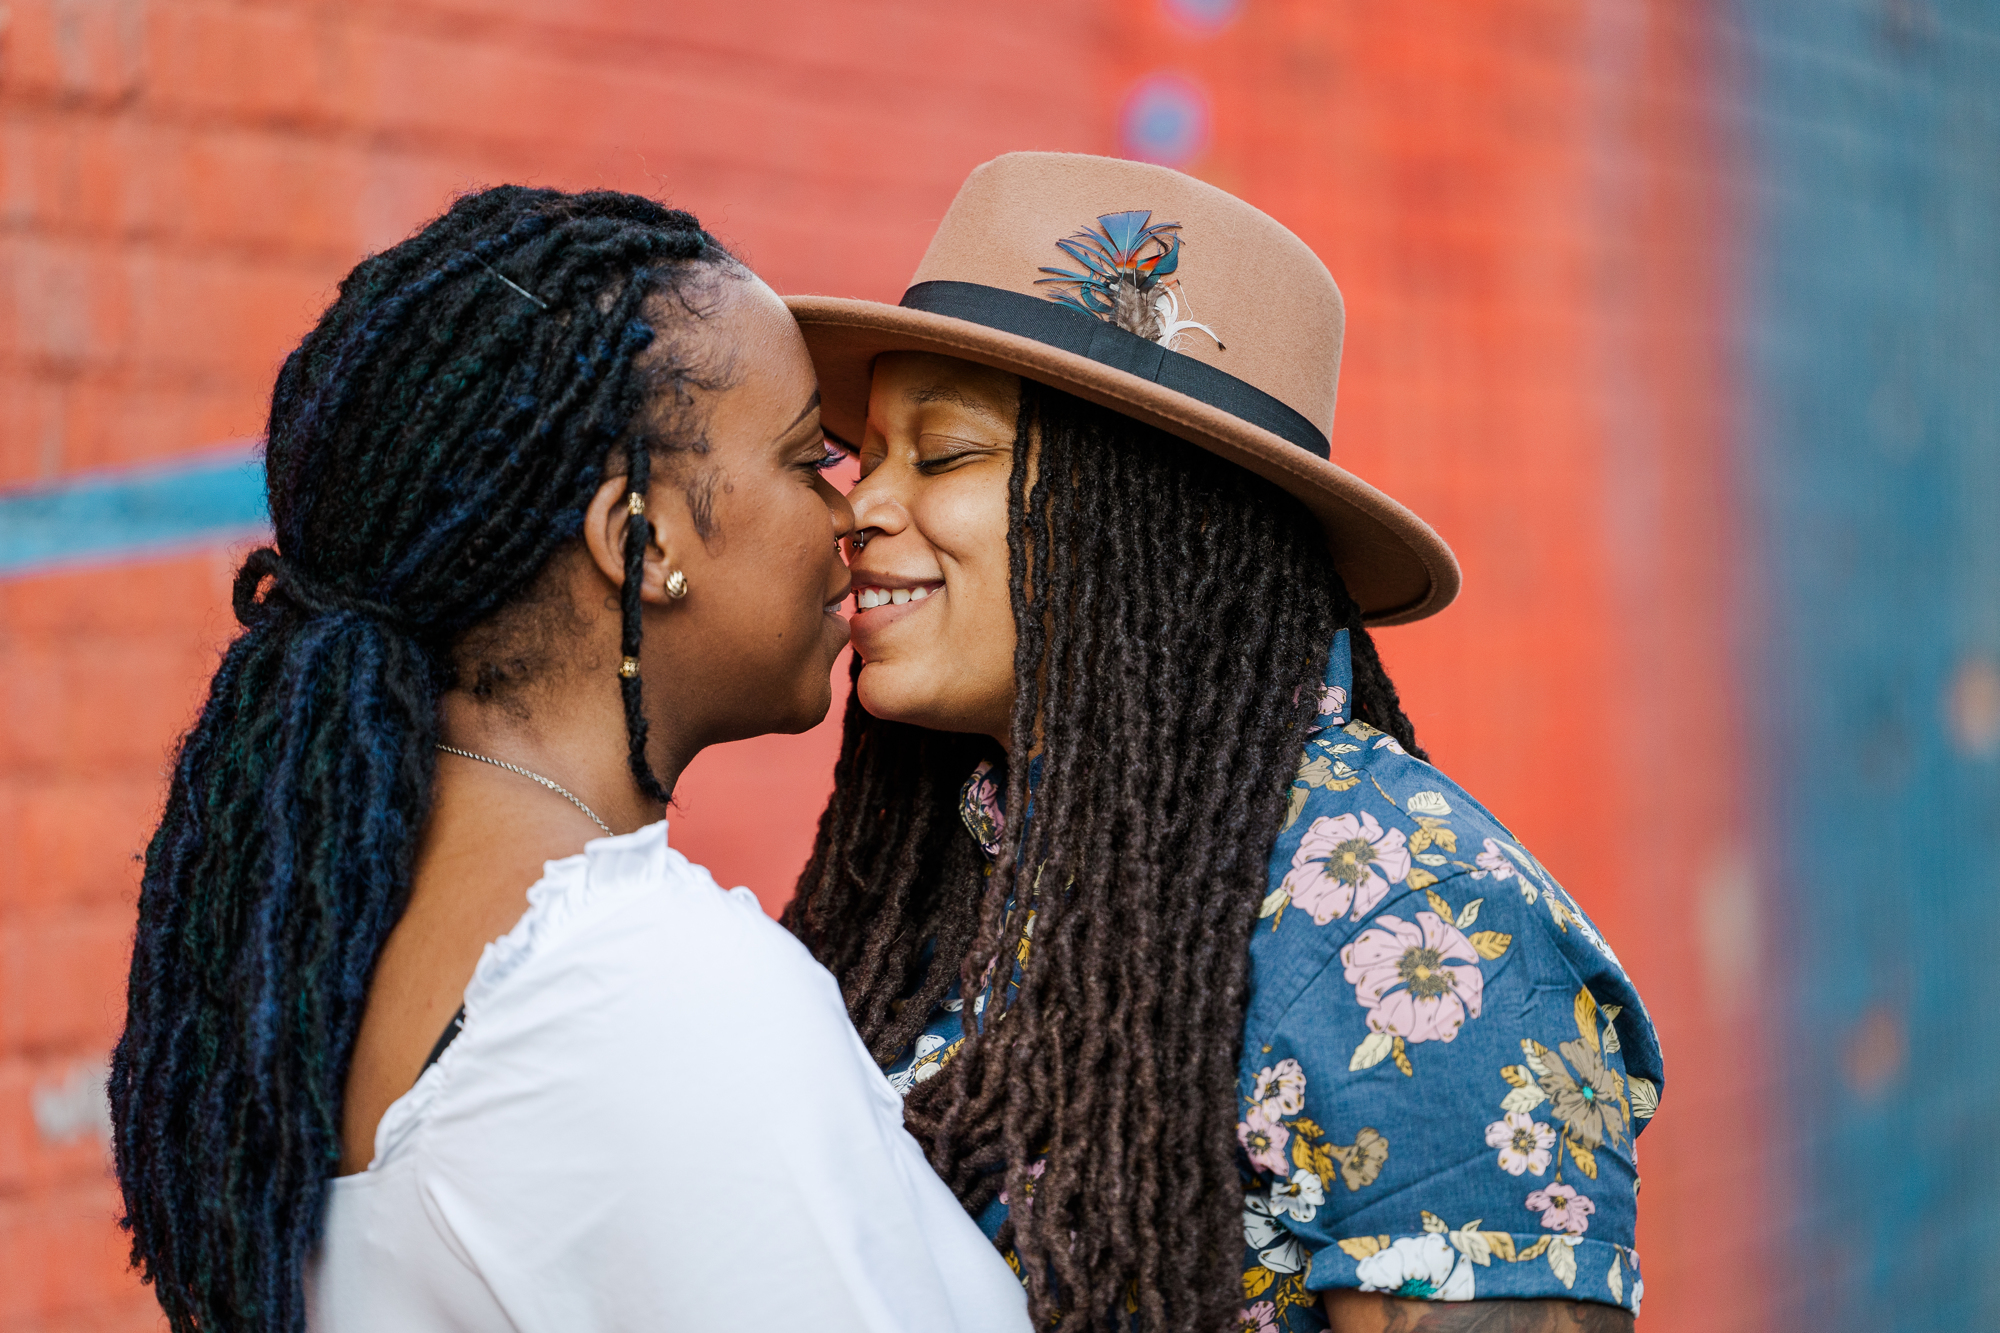 Enchanting Summer Engagement Photography in DUMBO